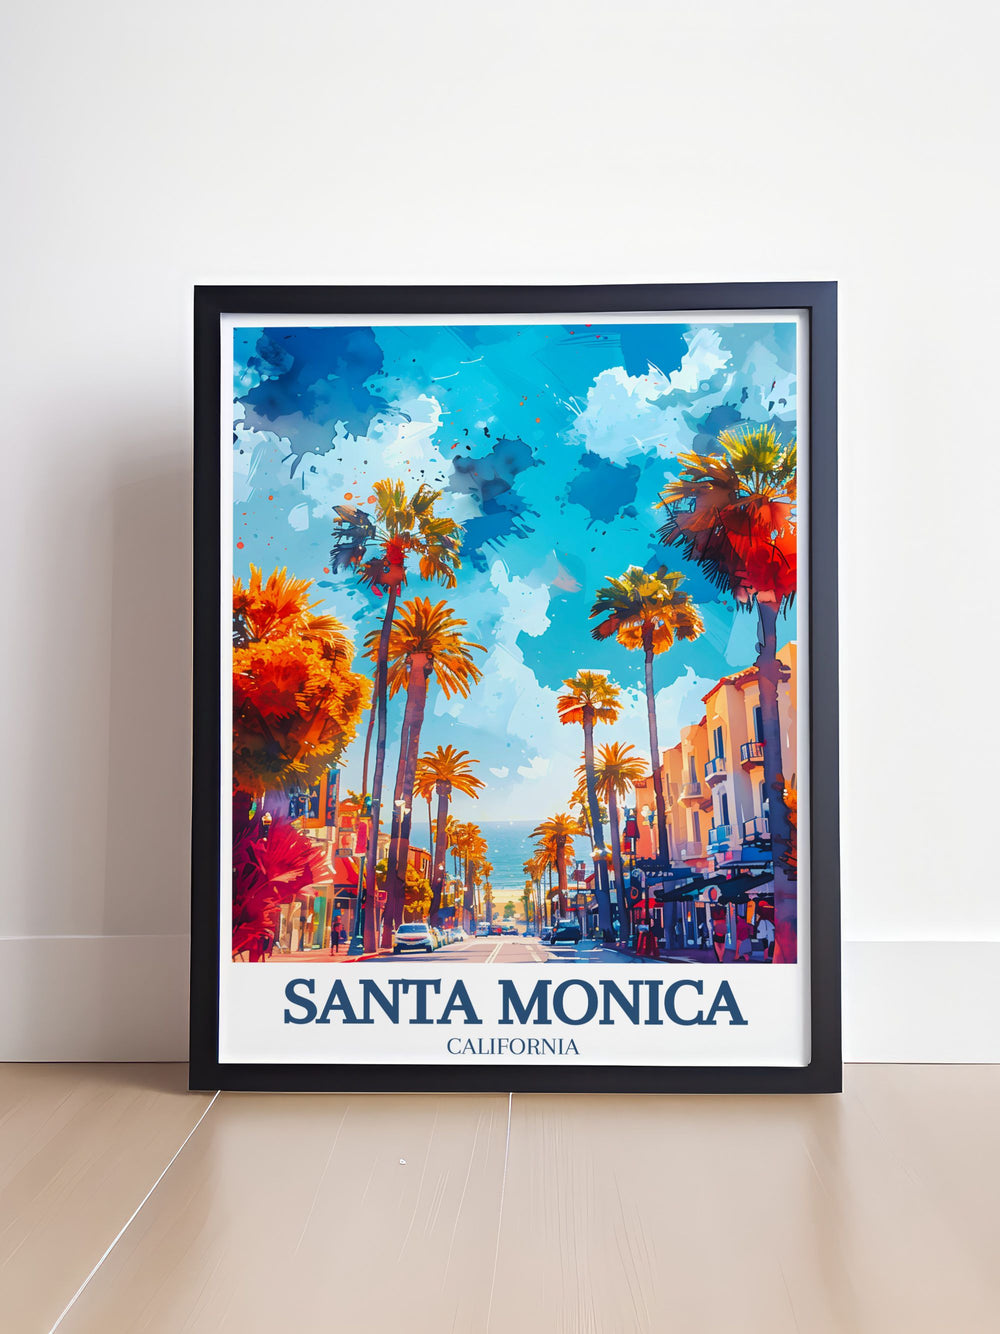 Santa Monica Place art print, capturing the upscale shopping experience, gourmet dining options, and contemporary design, making it a sophisticated addition to your home decor.